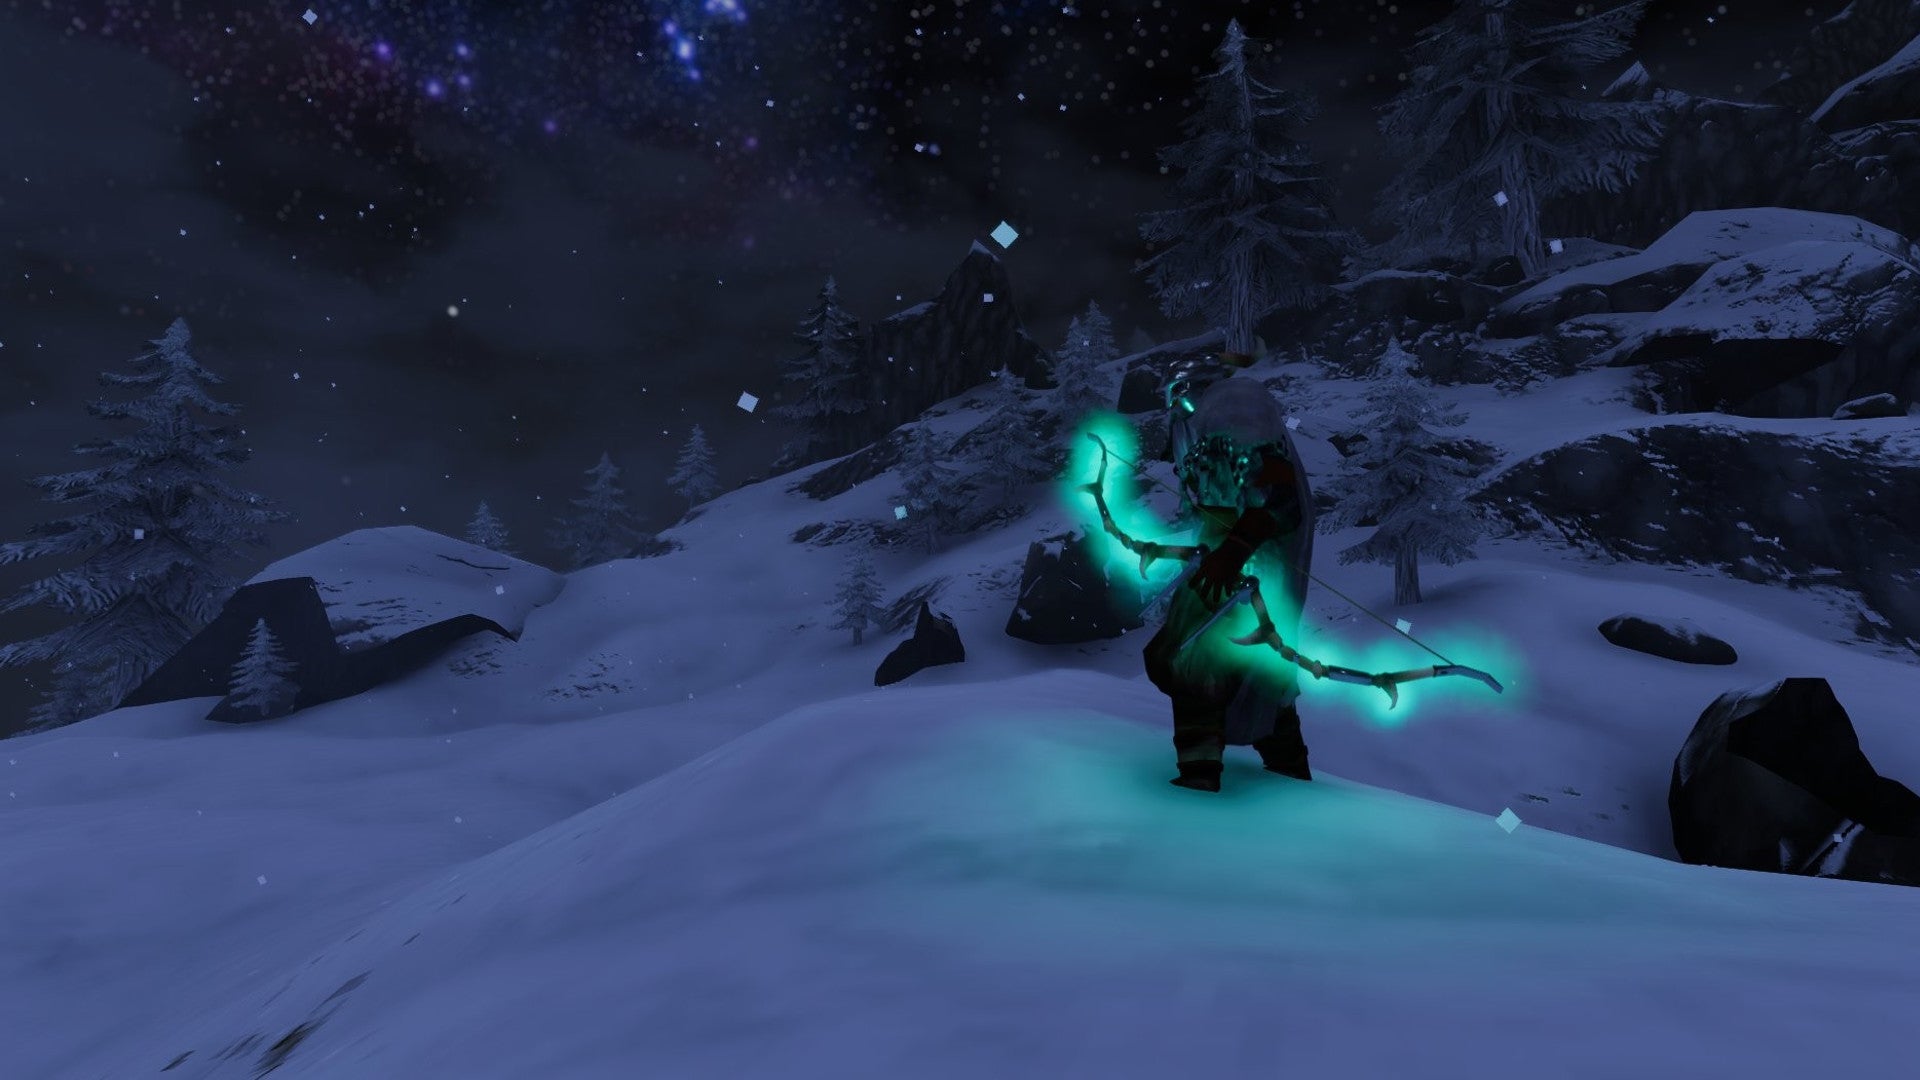 A Valheim screenshot of a late-game player in a Mountains biome, wielding a Draugr Fang bow.